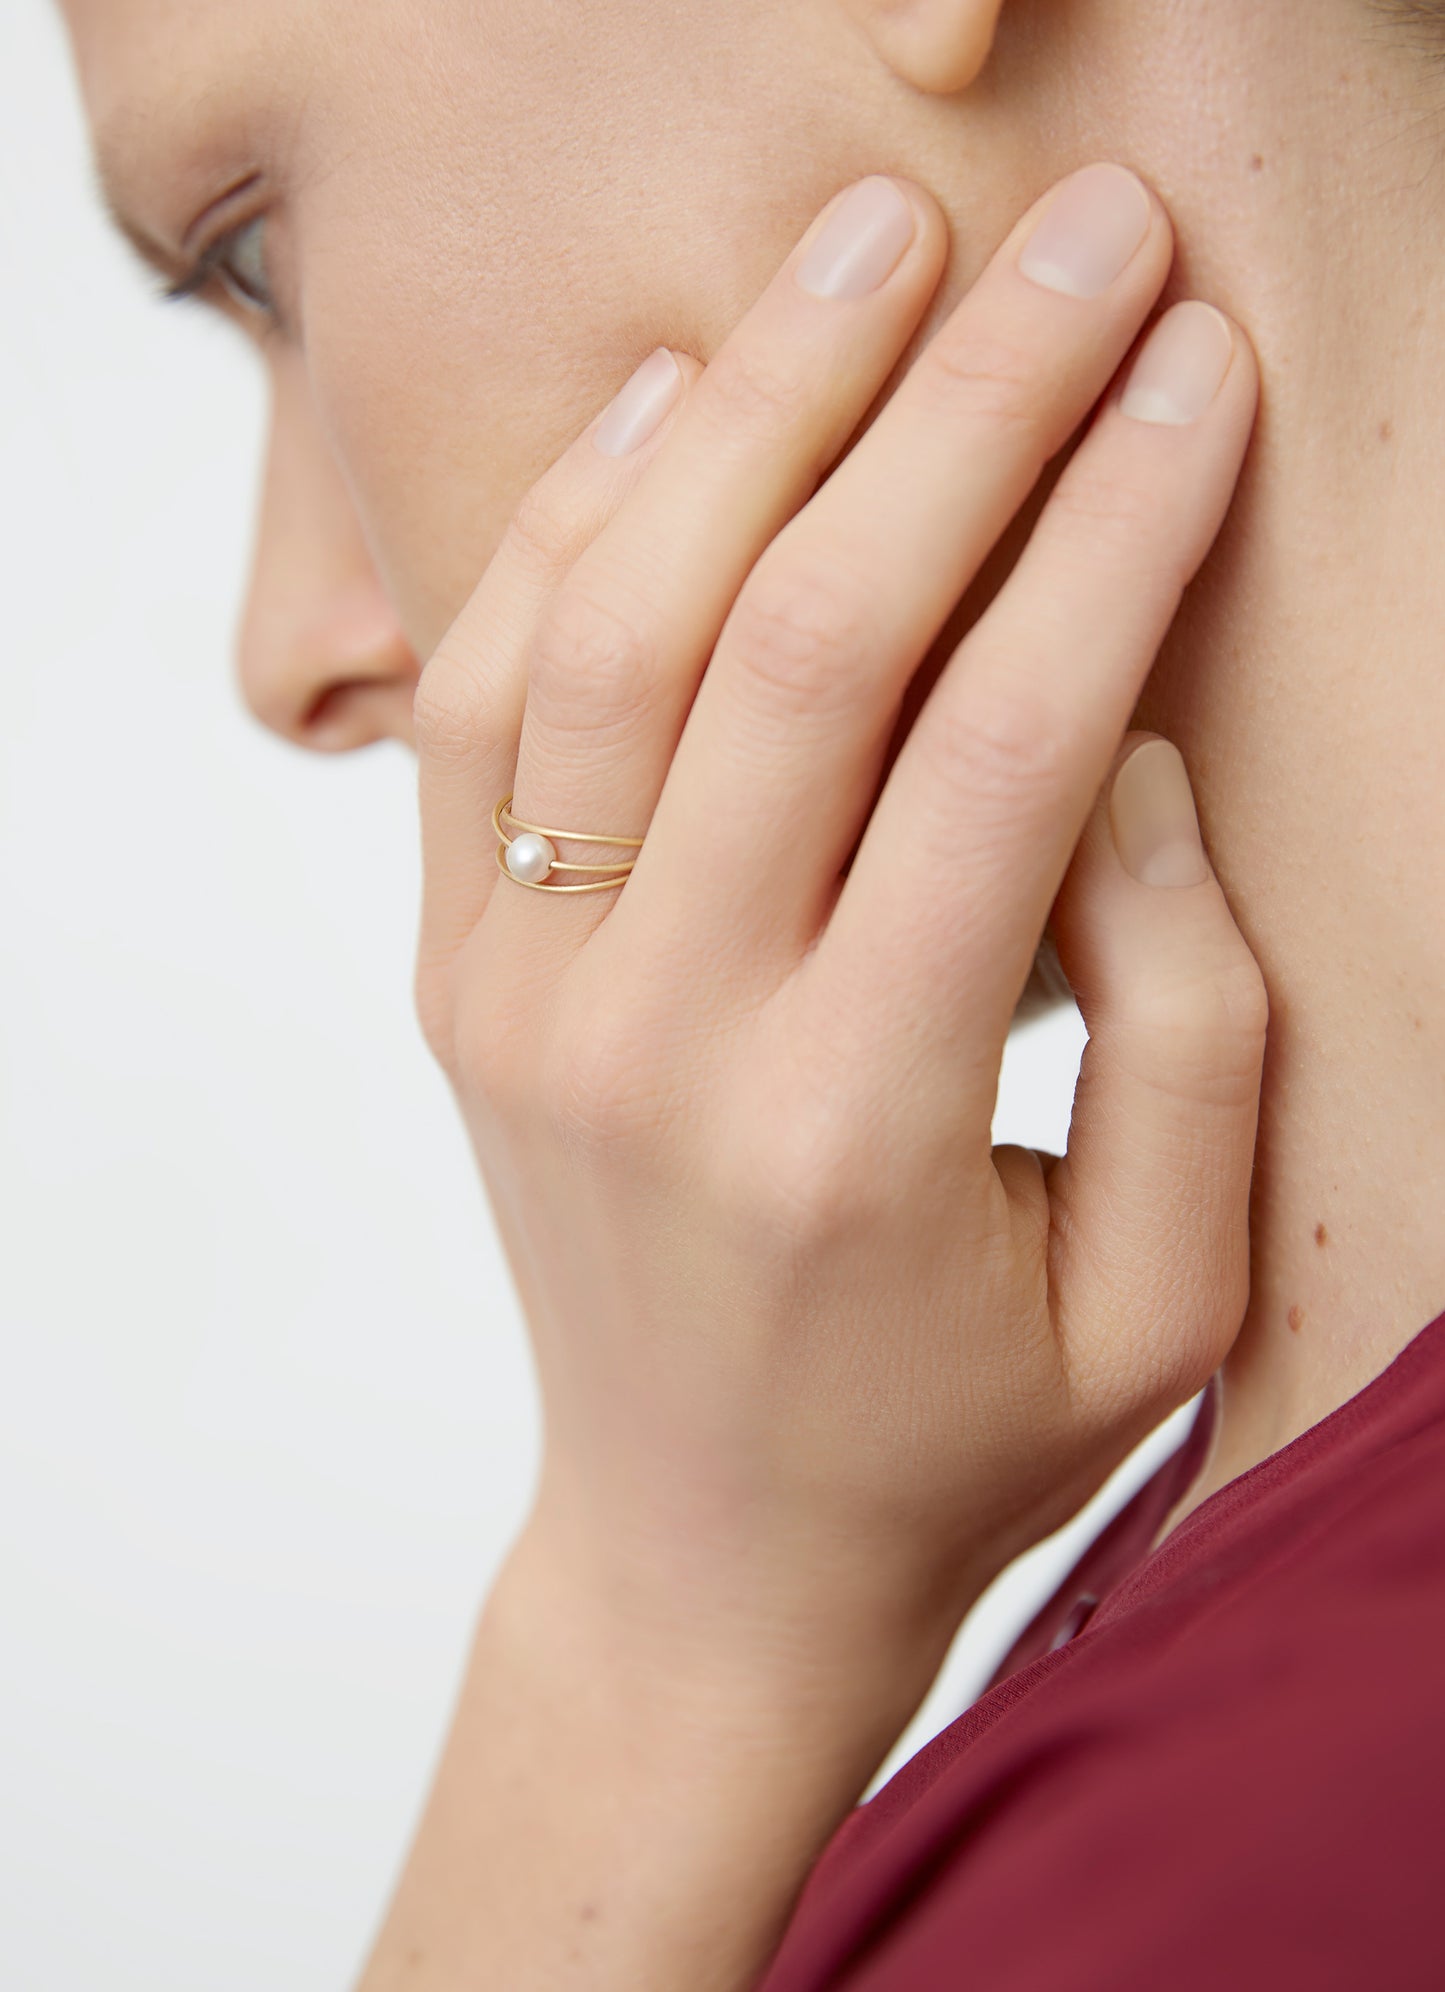 18KT yellow gold ring with white akoya pearl (diameter 4,8 MM) worn by a female hand  - Tre Cerchi